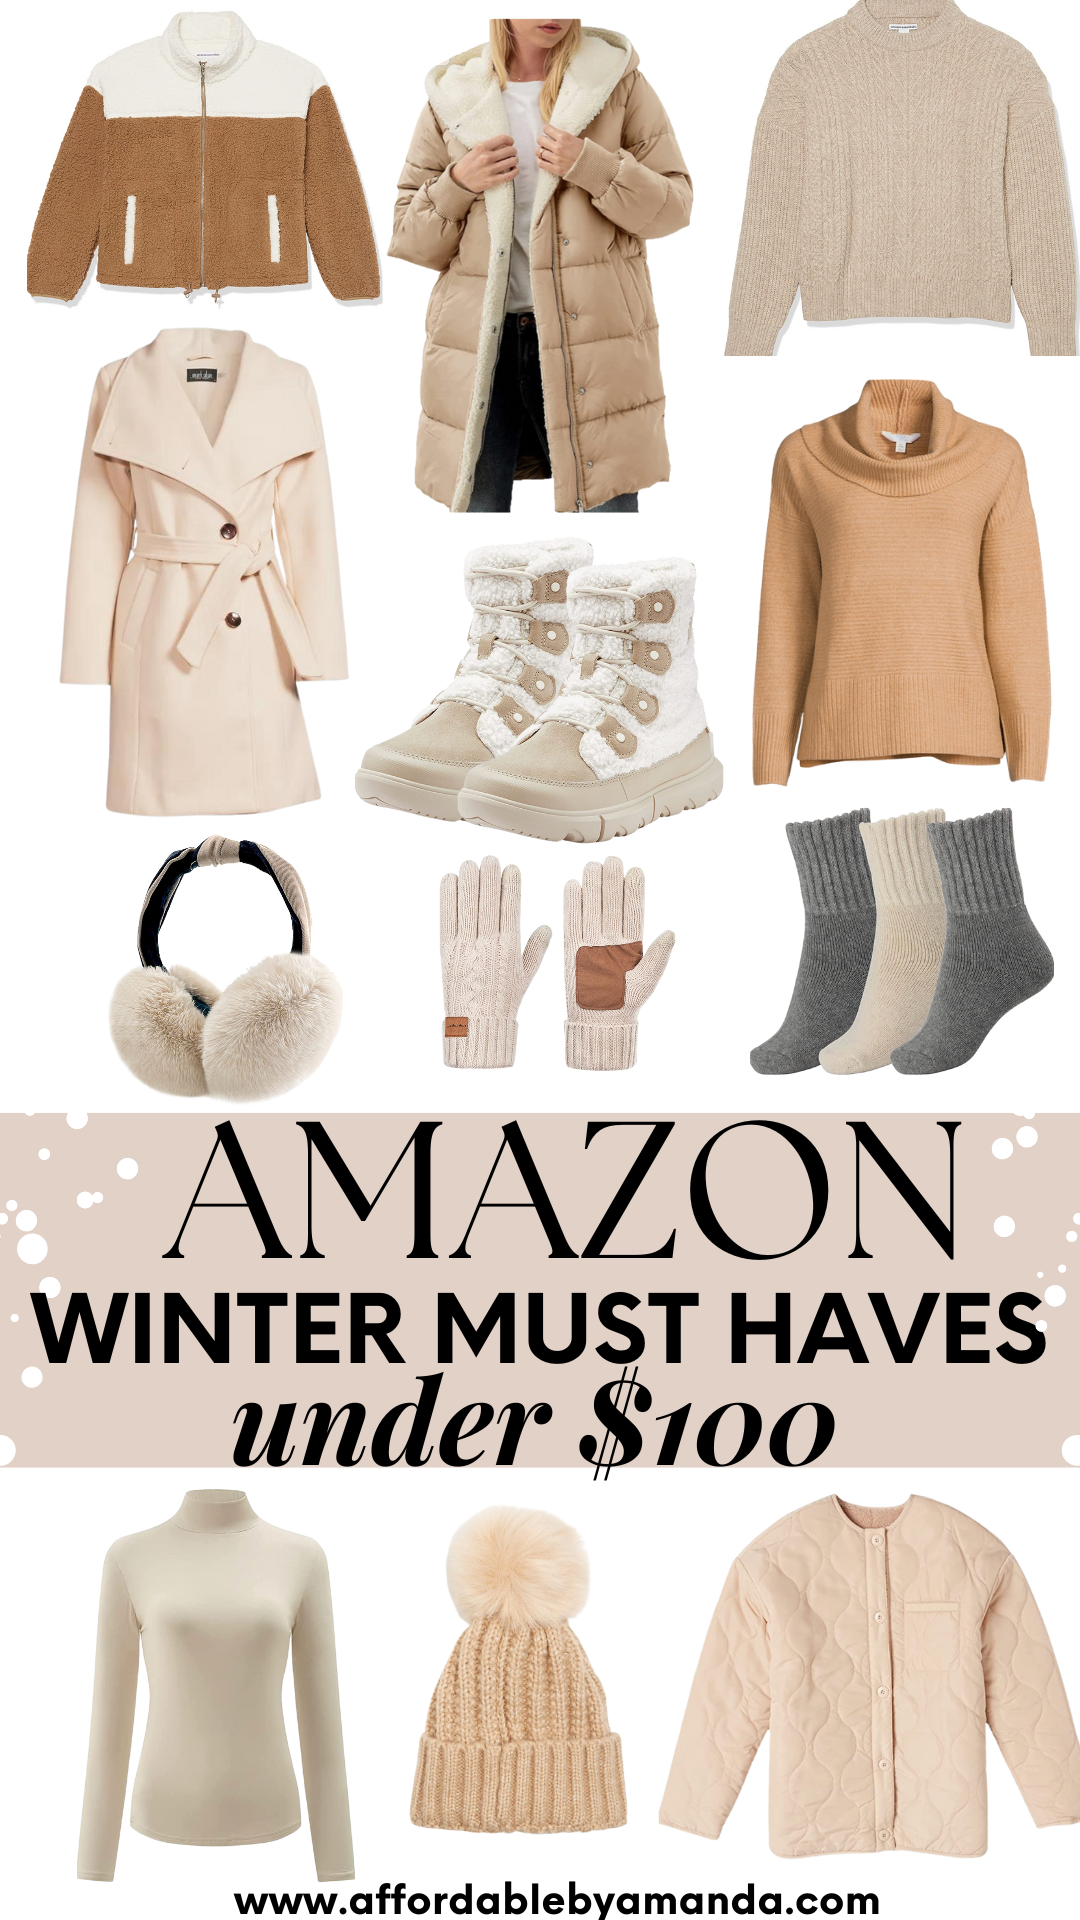 Amazon Winter Must Haves 2022 | Amazon Winter Fashion Finds | Best Amazon Fashion for Women 2022 | Amazon Fashion Finds